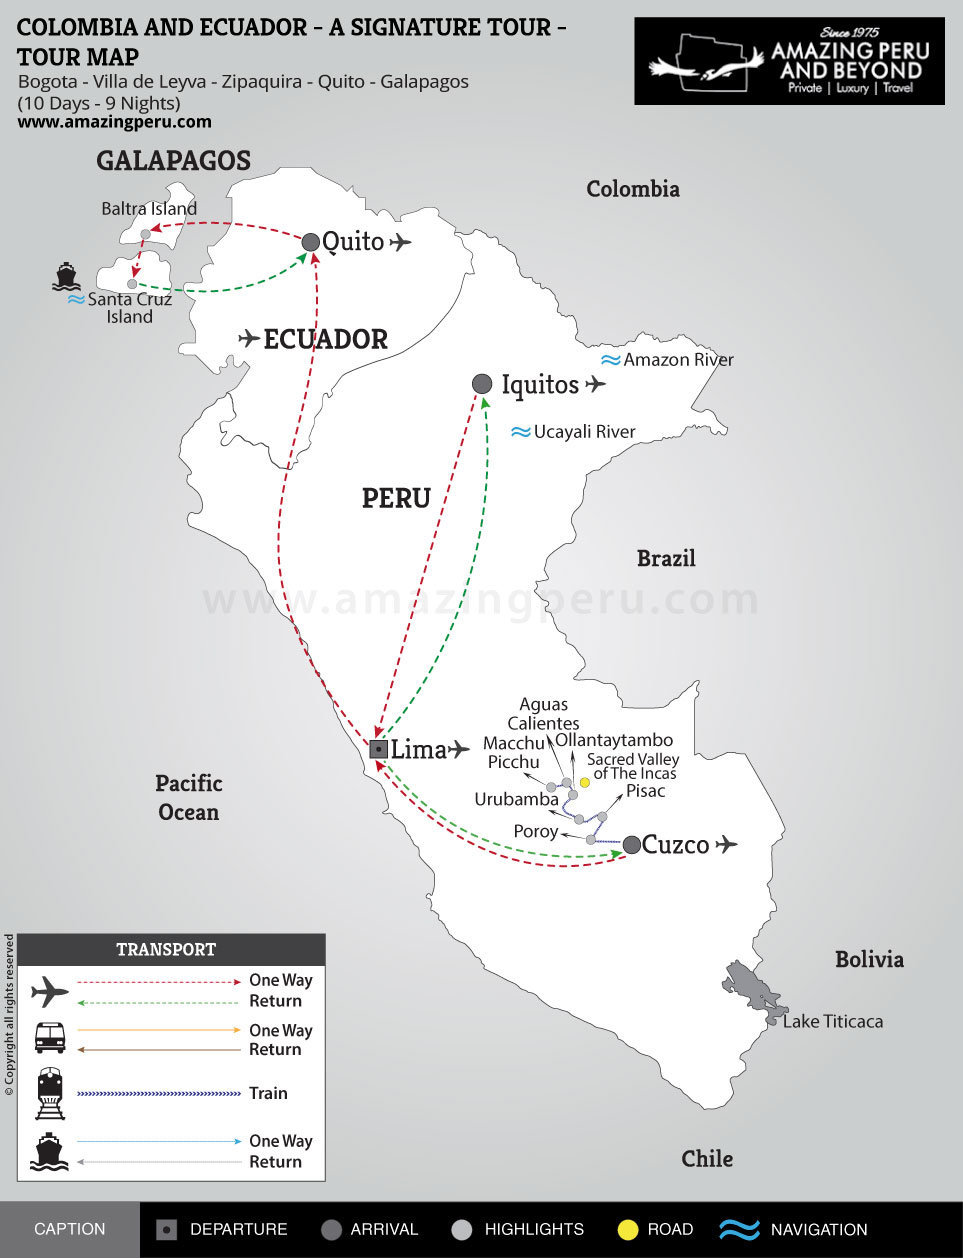 Colombia and Ecuador - A signature Tour - 10 days / 9 nights.